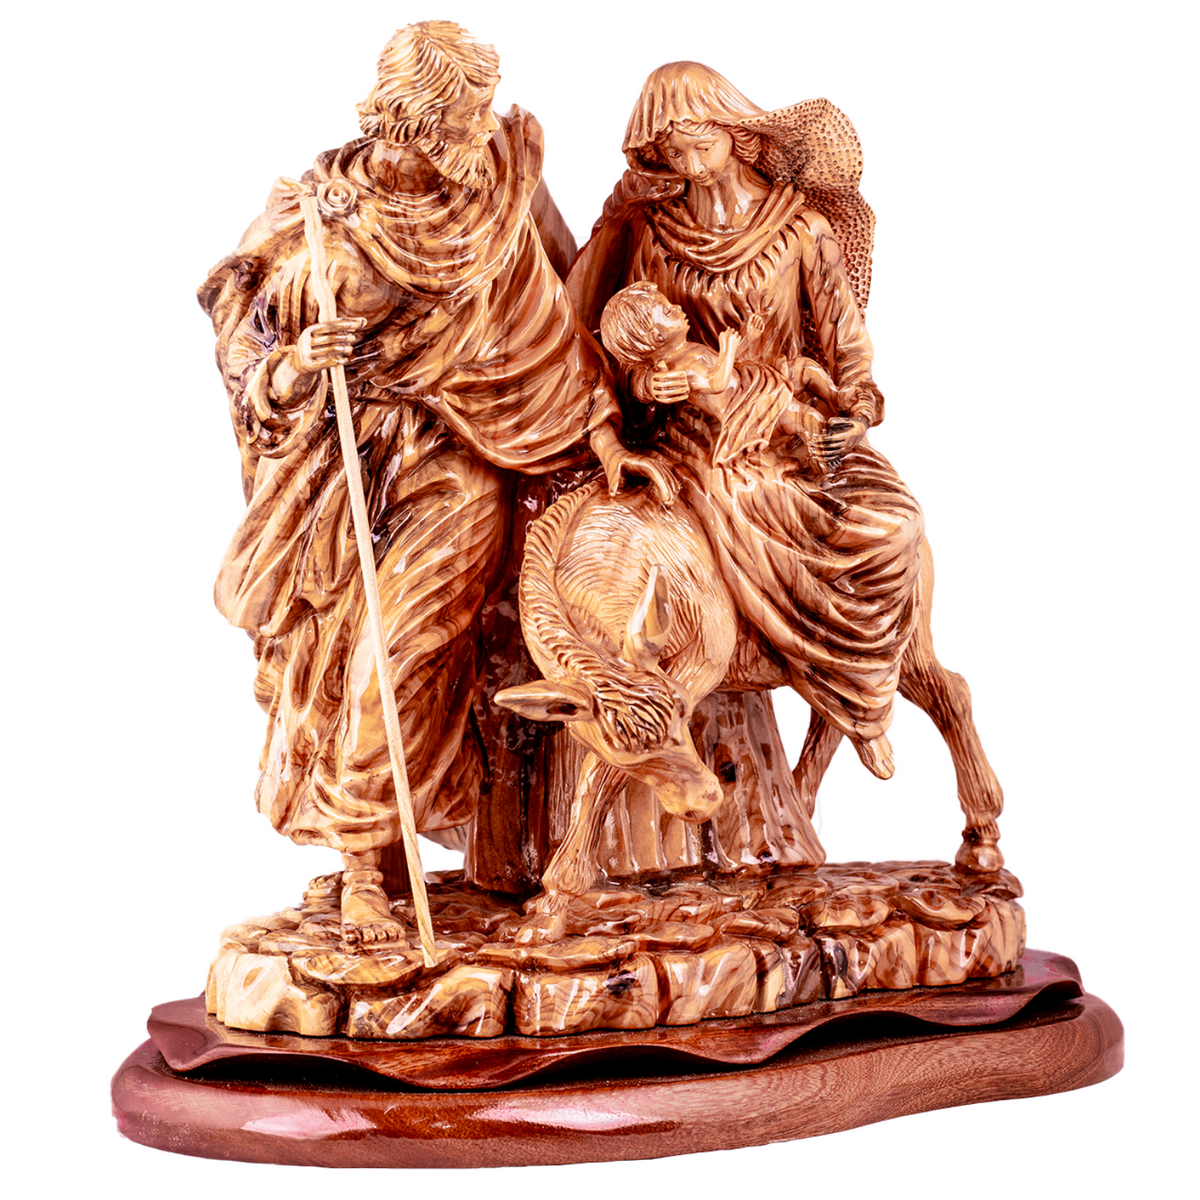 Holy Family flight to Egypt, Cathedral Quality, Size: 13.5" x 9 x 13.5"